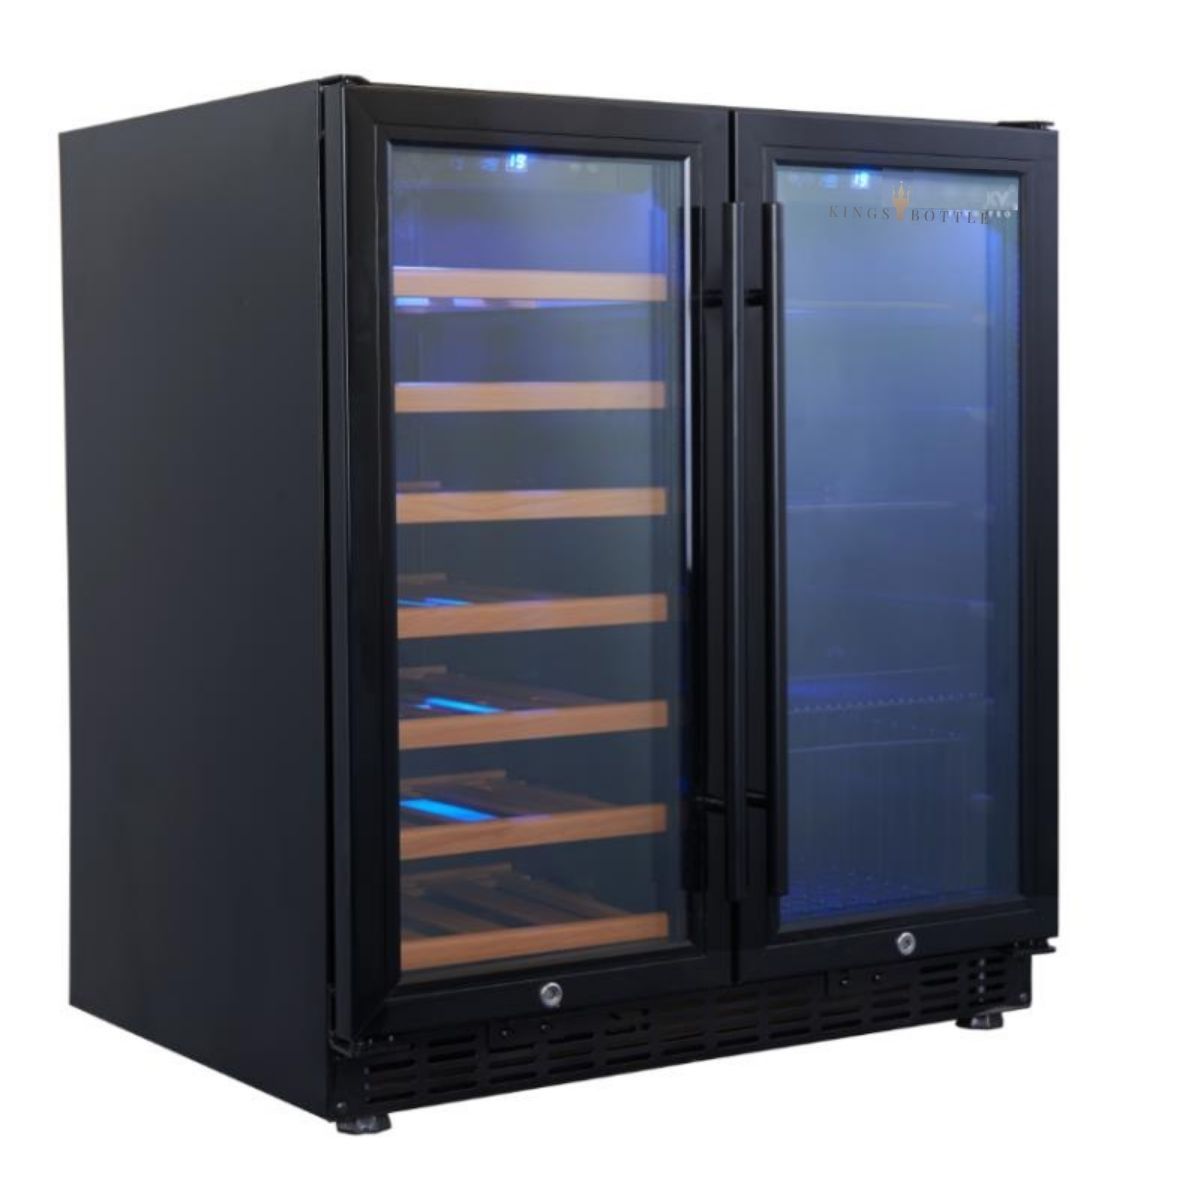 Kingsbottle 30" Under Counter Low-E Glass Door Wine and Beer Cooler Combo KBUSF66BW-BP-Wine Coolers-The Wine Cooler Club